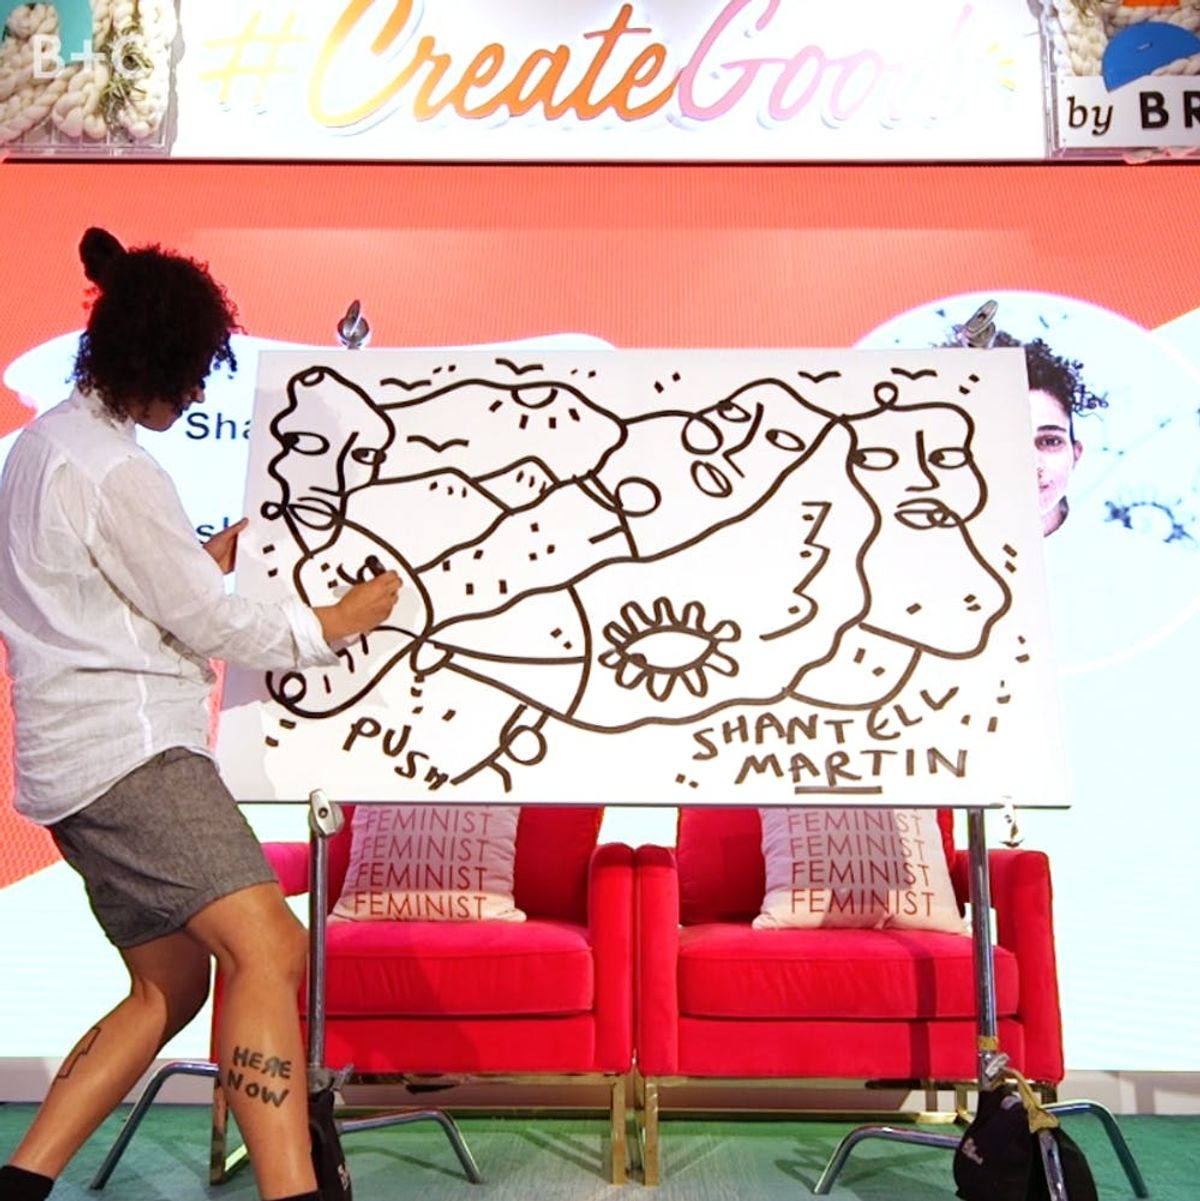 Watch artist Shantell Martin draw a stream-of-consciousness portrait on stage at #CreateGood